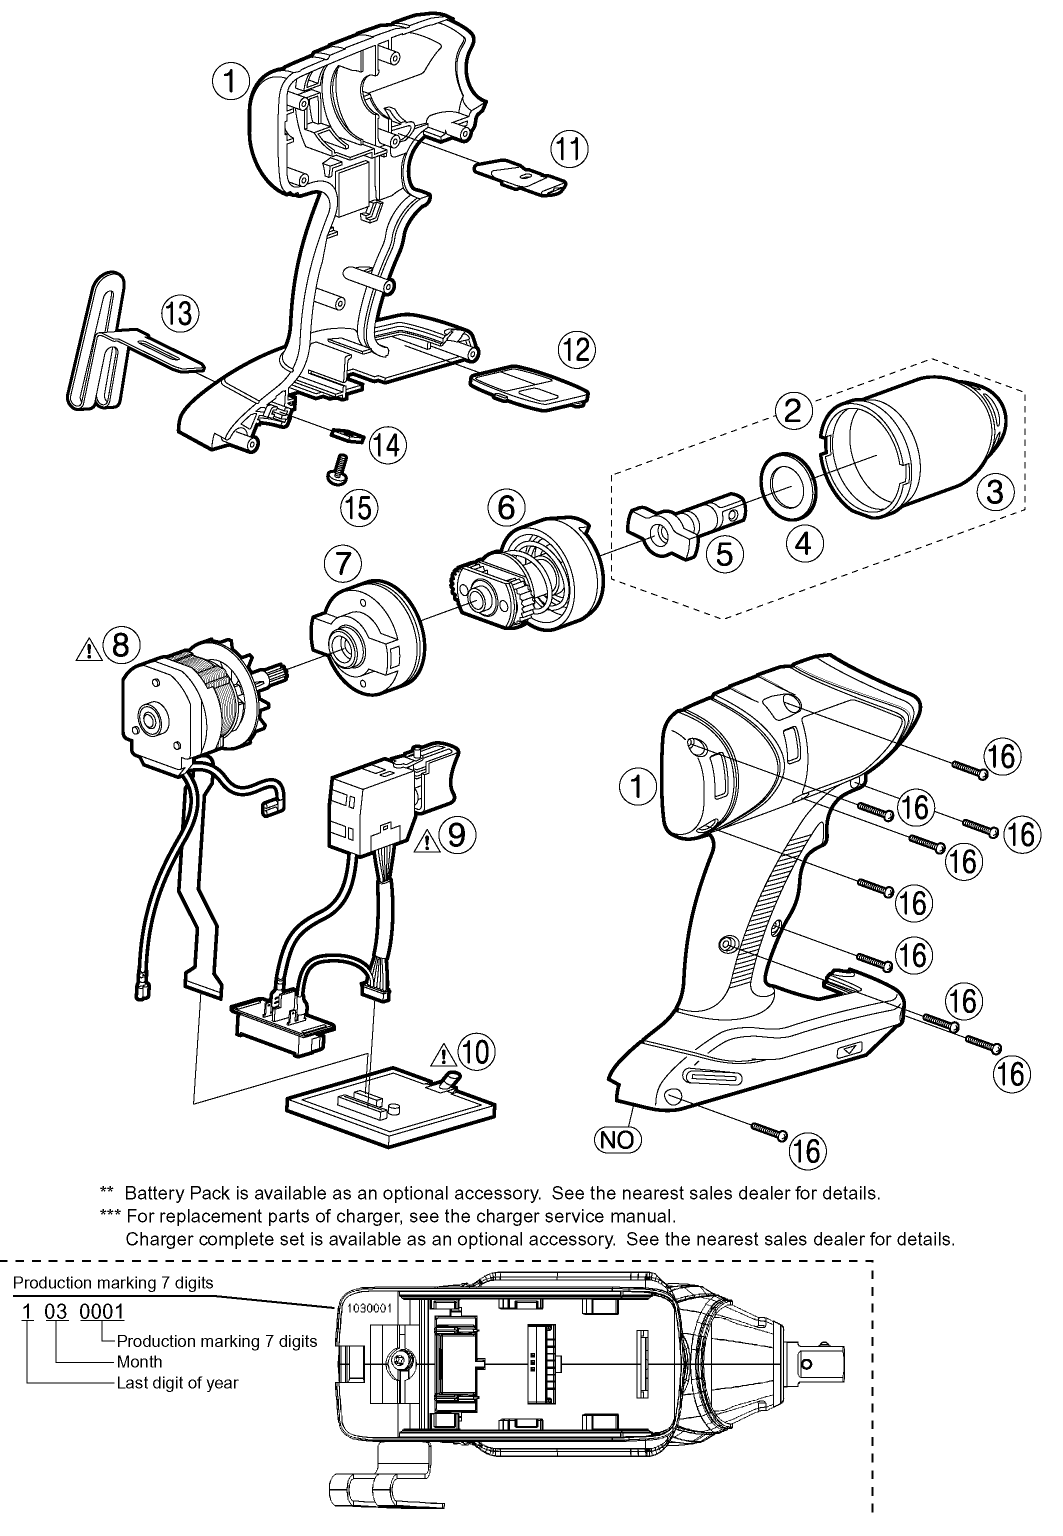 EY7551: Exploded View